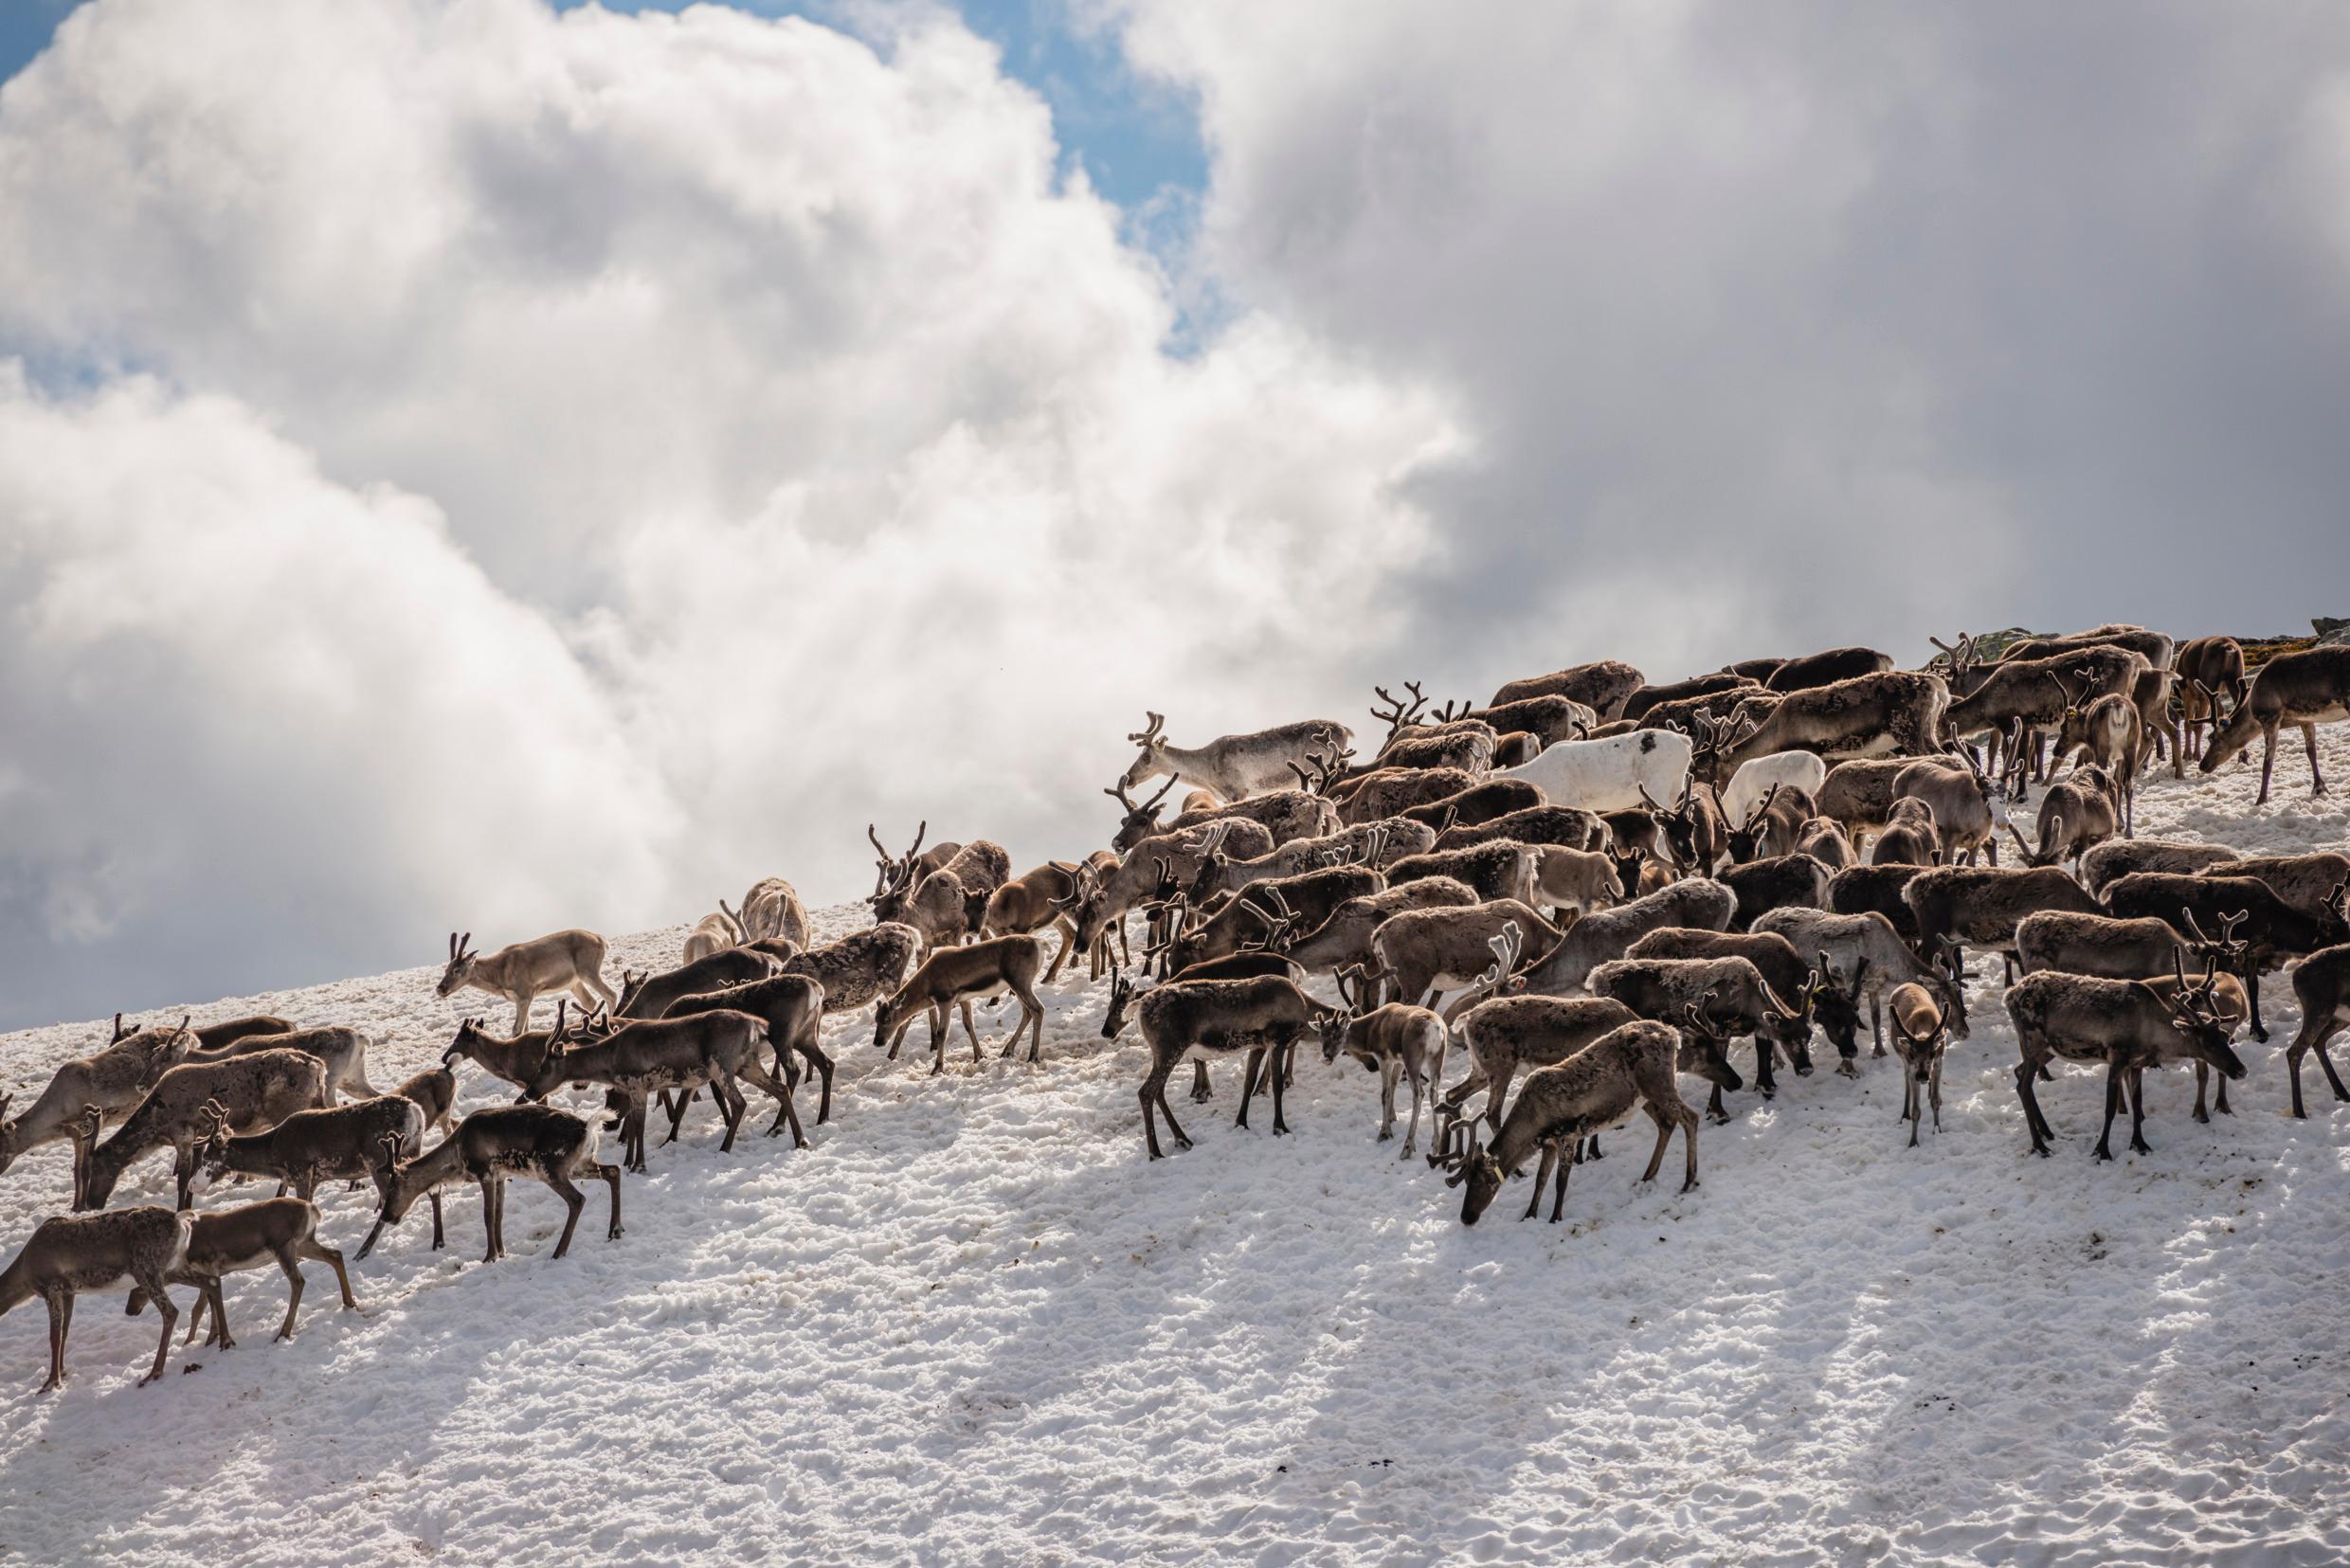 A heard of reindeer on a snowy mountain, a clouded sky in the background.